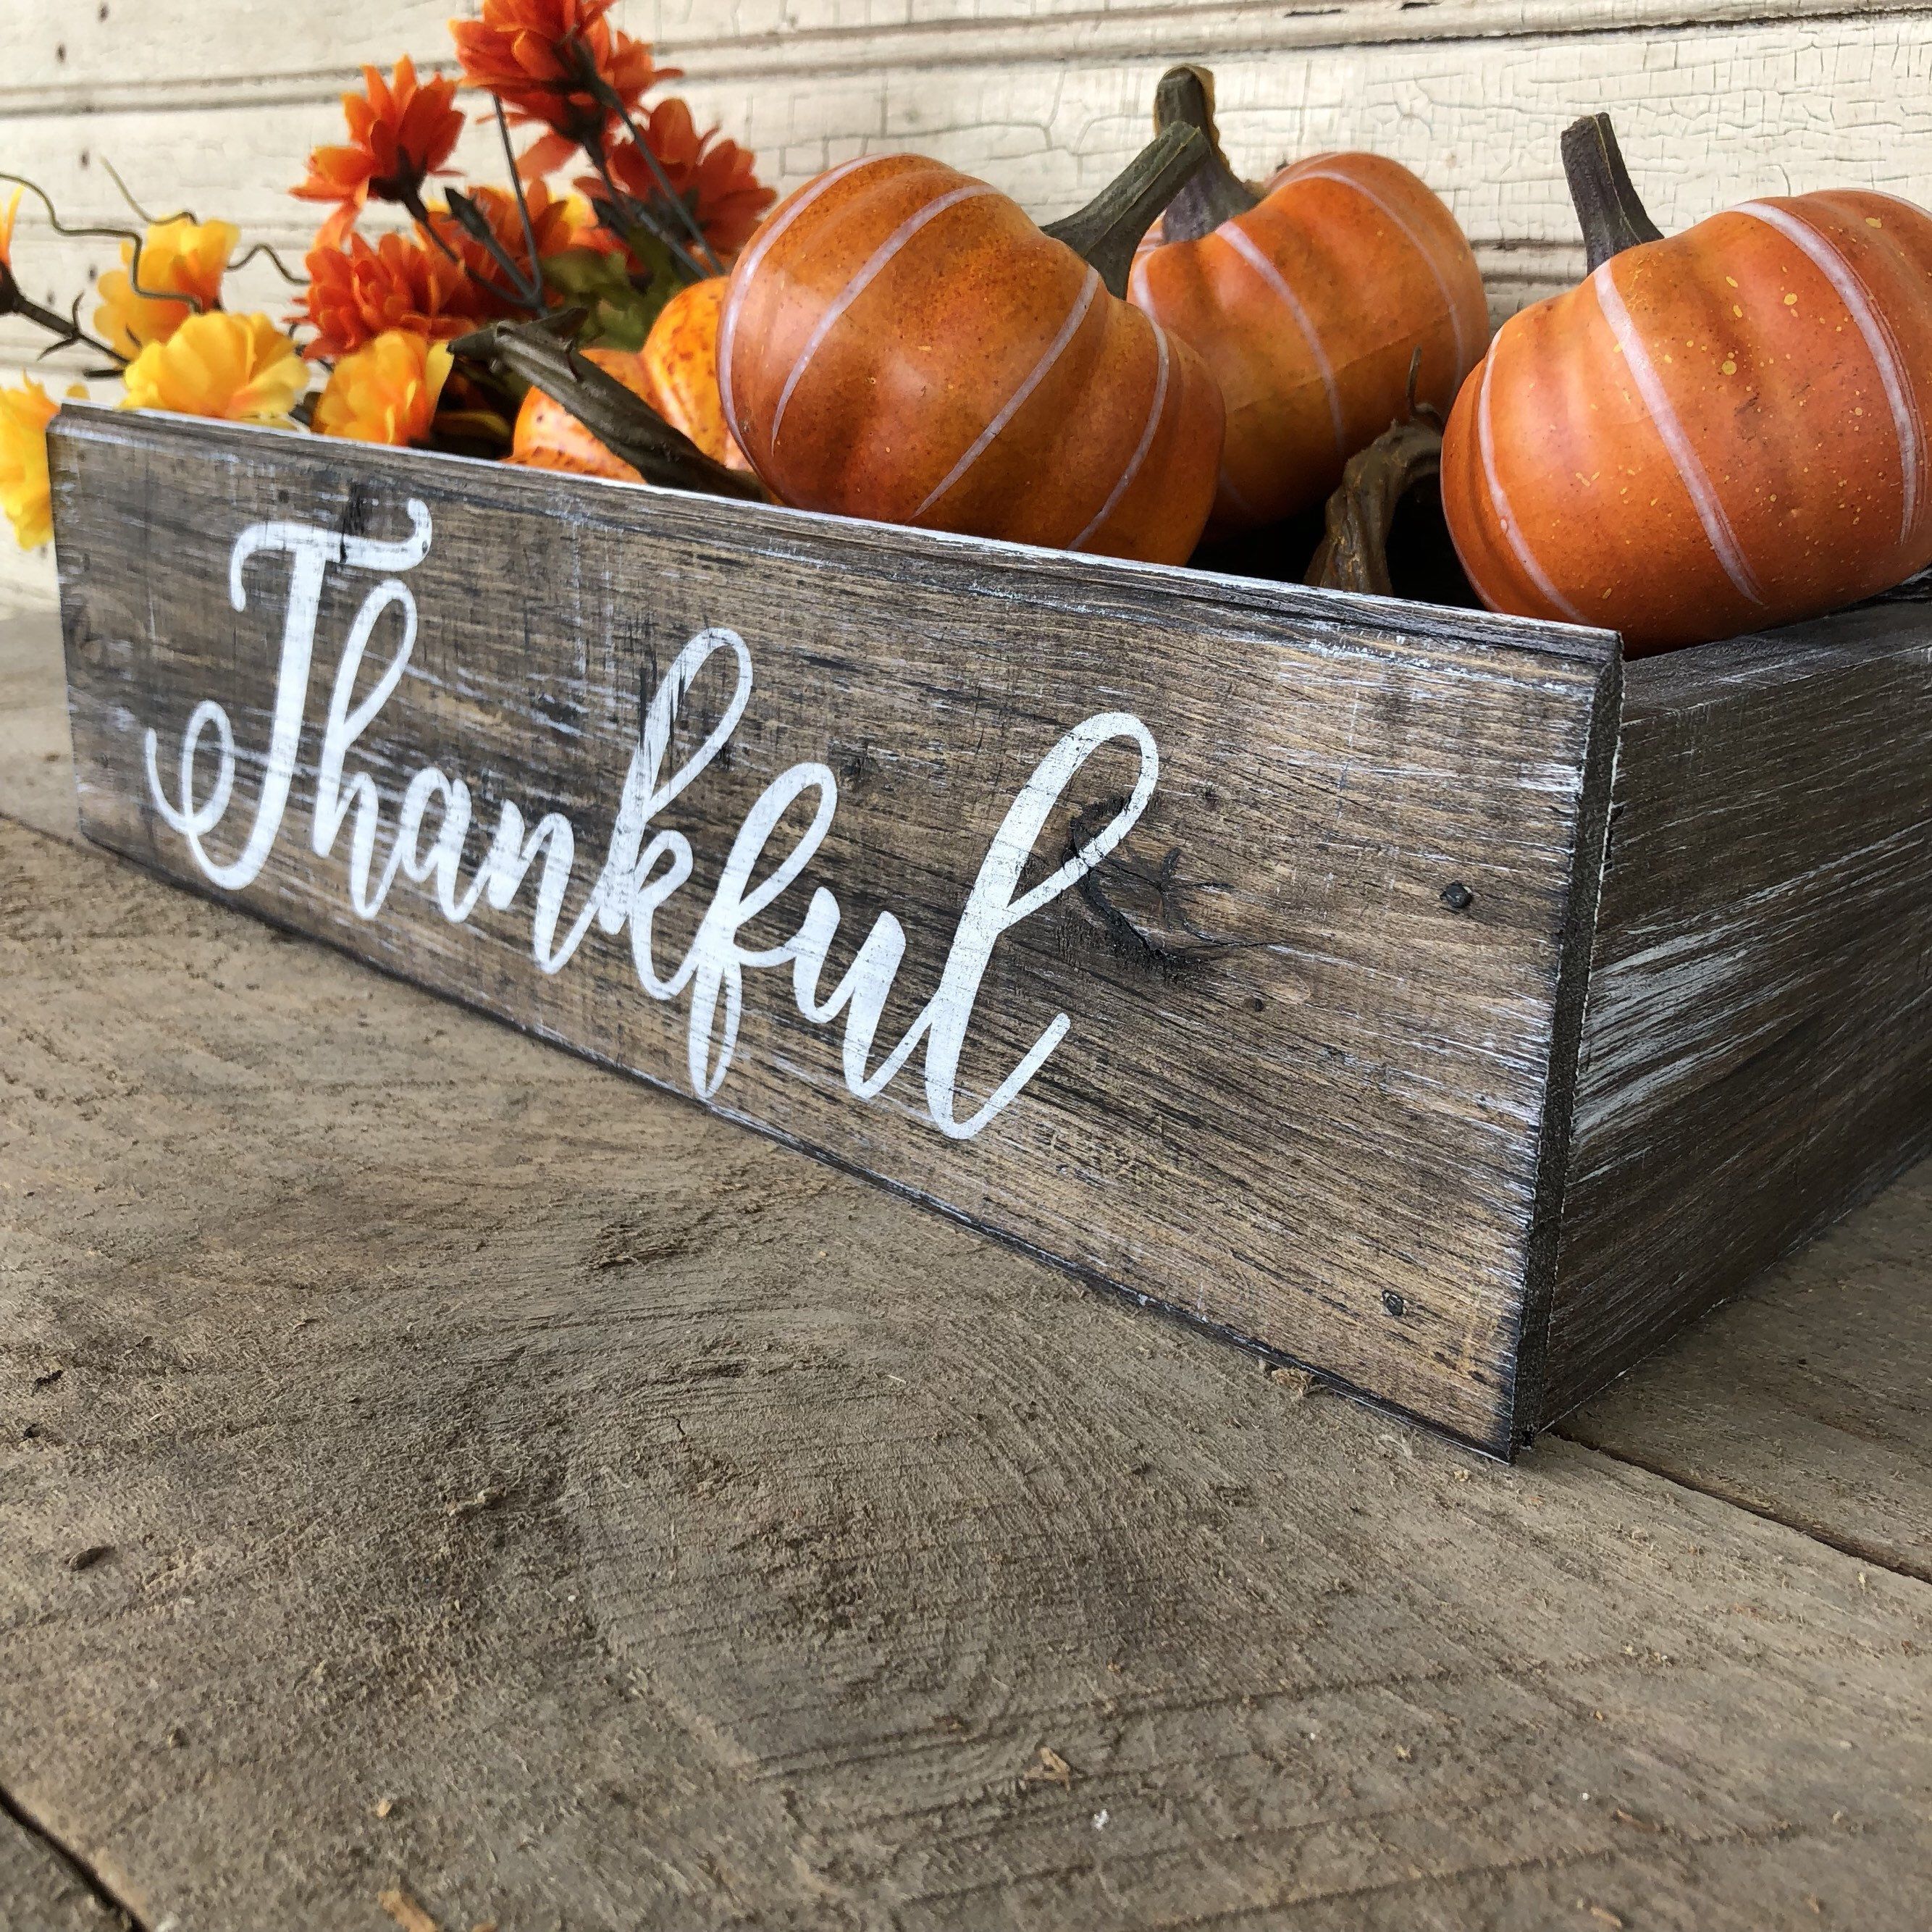 Thankful Farmhouse Style Crate, Brown Stained Wood Box for Thanksgiving, Farmhouse Decorating, Fall Table Centerpiece, Mason Jar, FREE SHIP -   19 diy thanksgiving centerpieces vases ideas